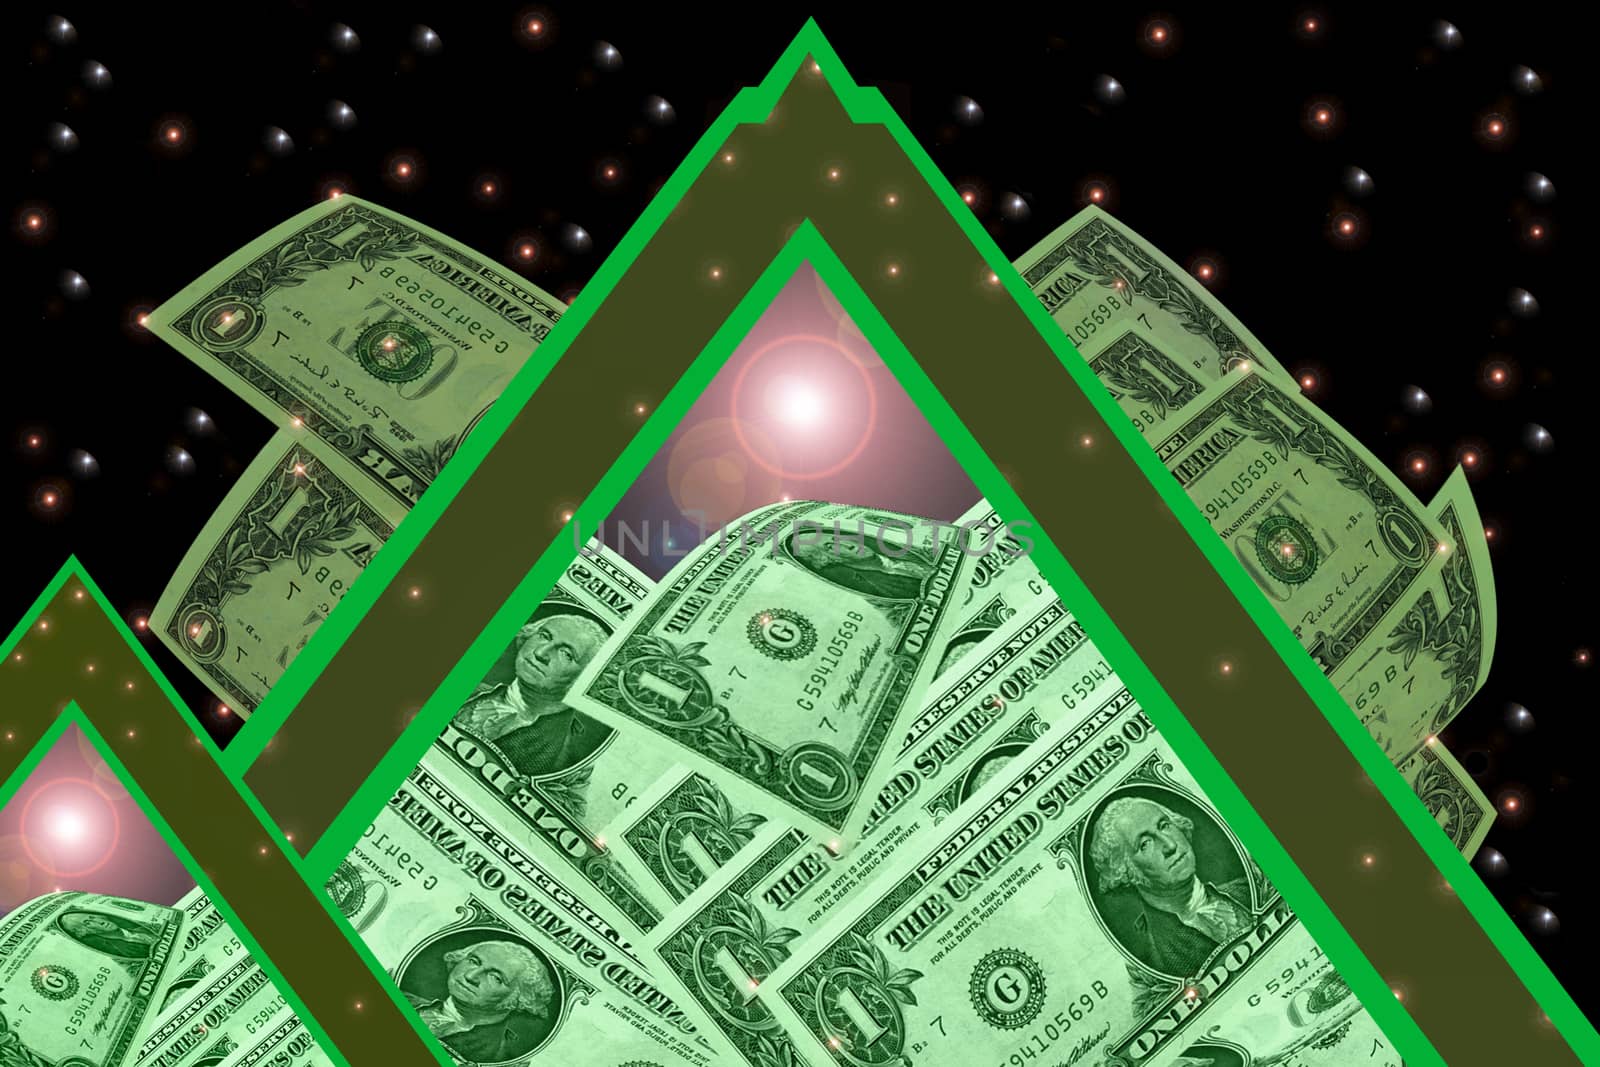 Monetary financial pyramids, like eternal monuments of history, stand under the night sky, covered with bright stars